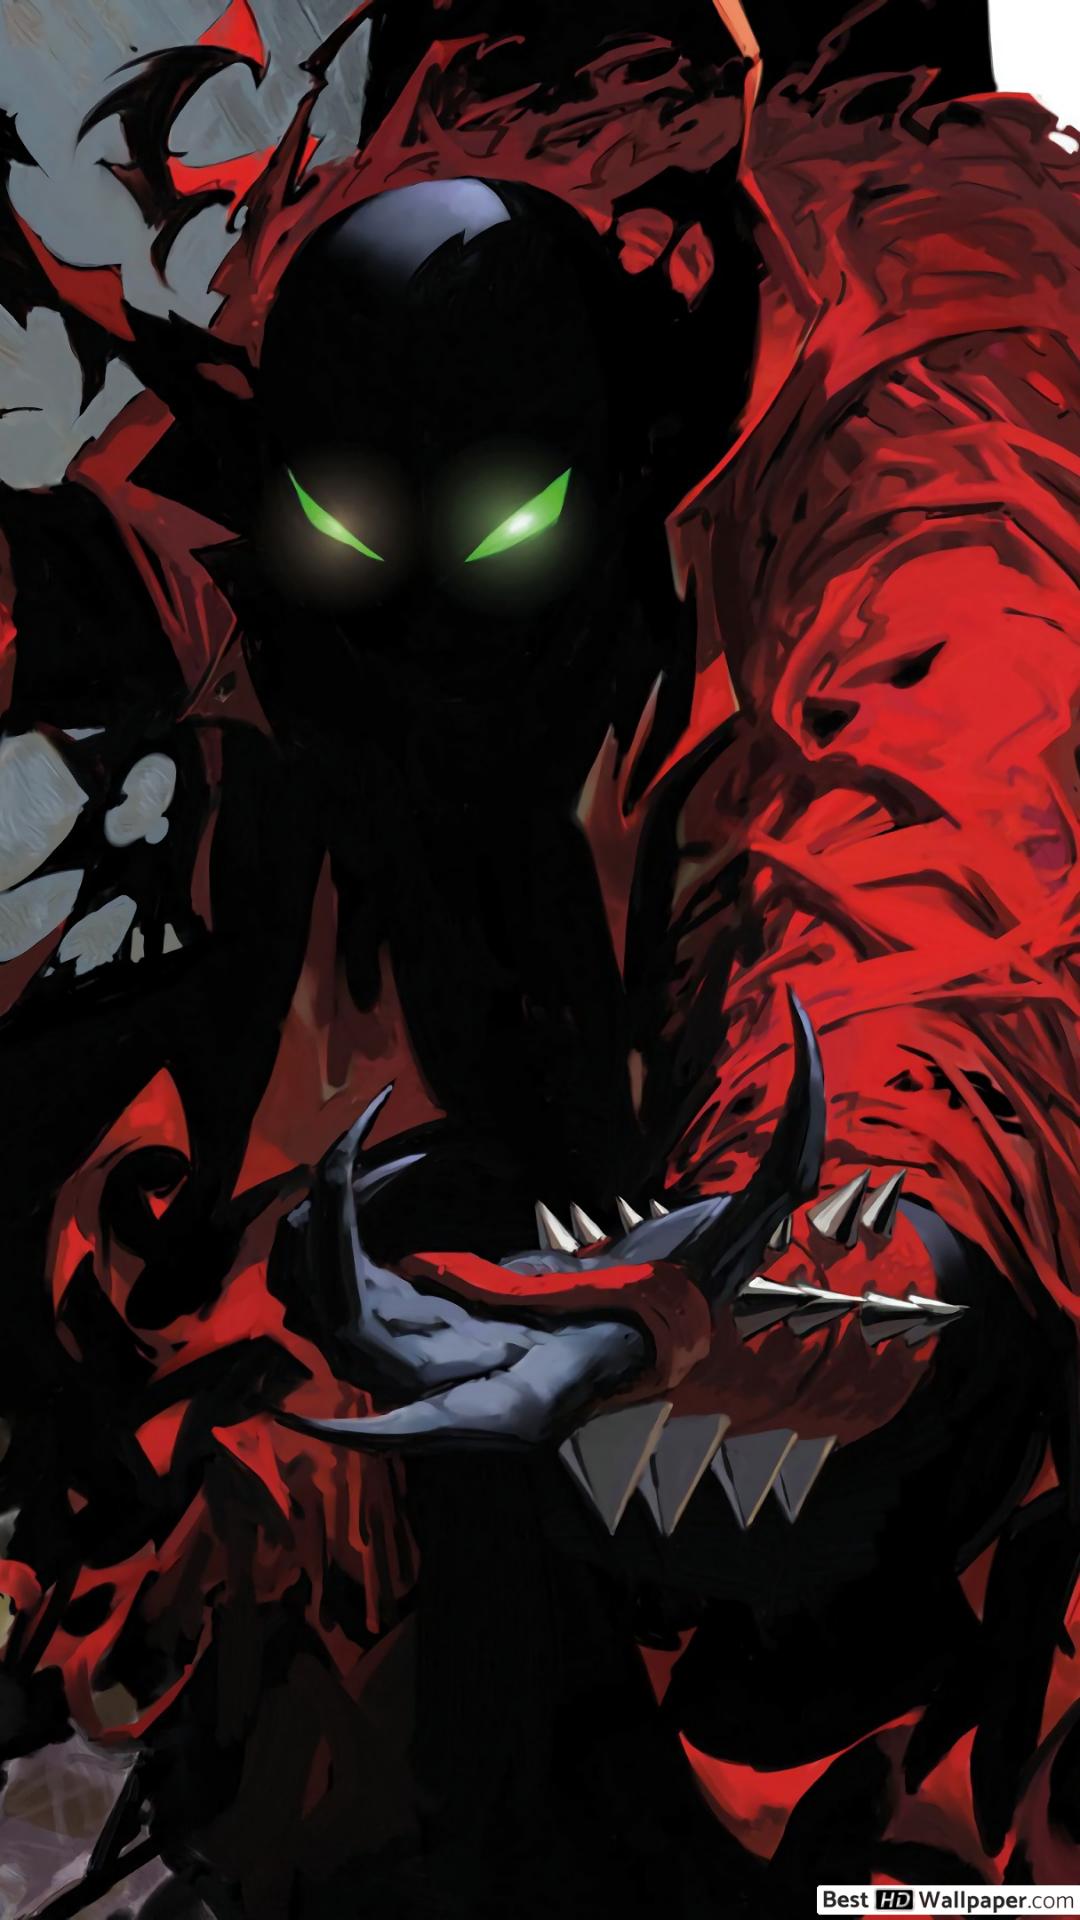 High Resolution Spawn Wallpaper Android - 1080x1920 Wallpaper 